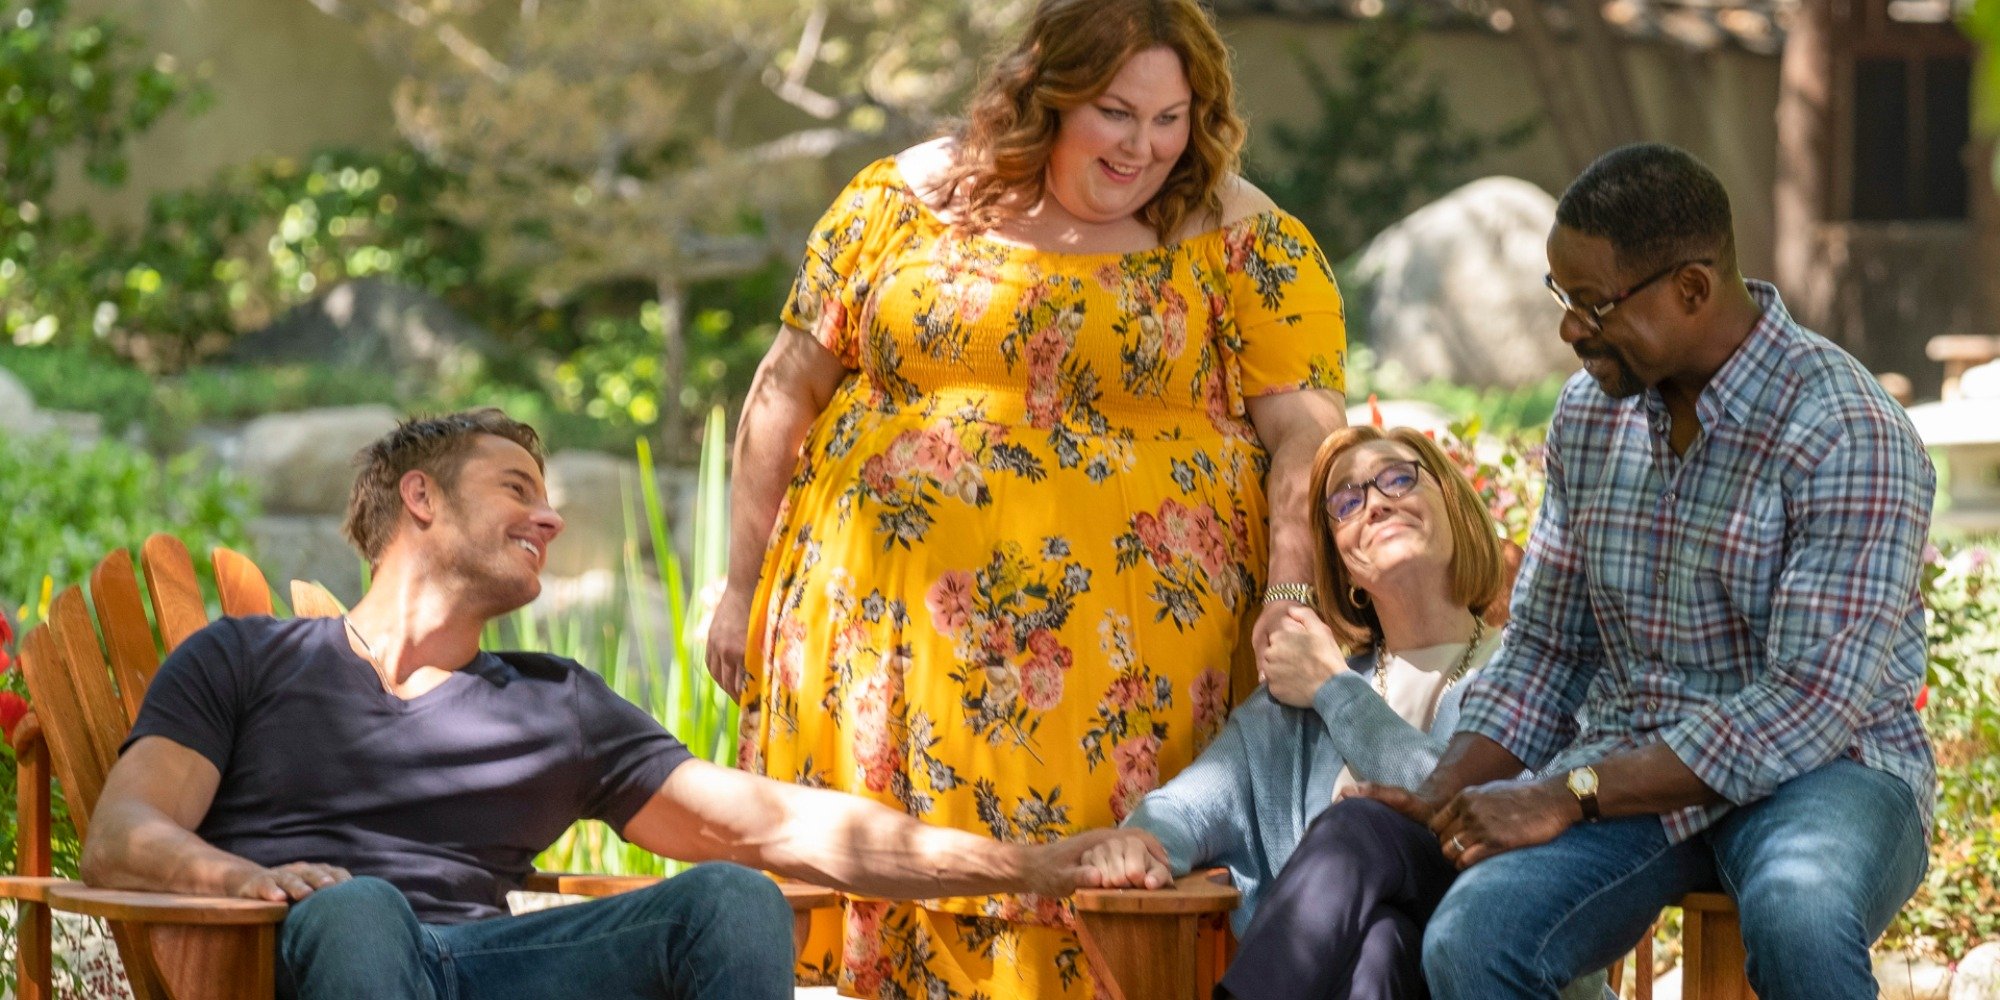 Justin Hartley, Chrissy Metz, Mandy Moore and Sterling K. Brown on the set of "This Is Us."